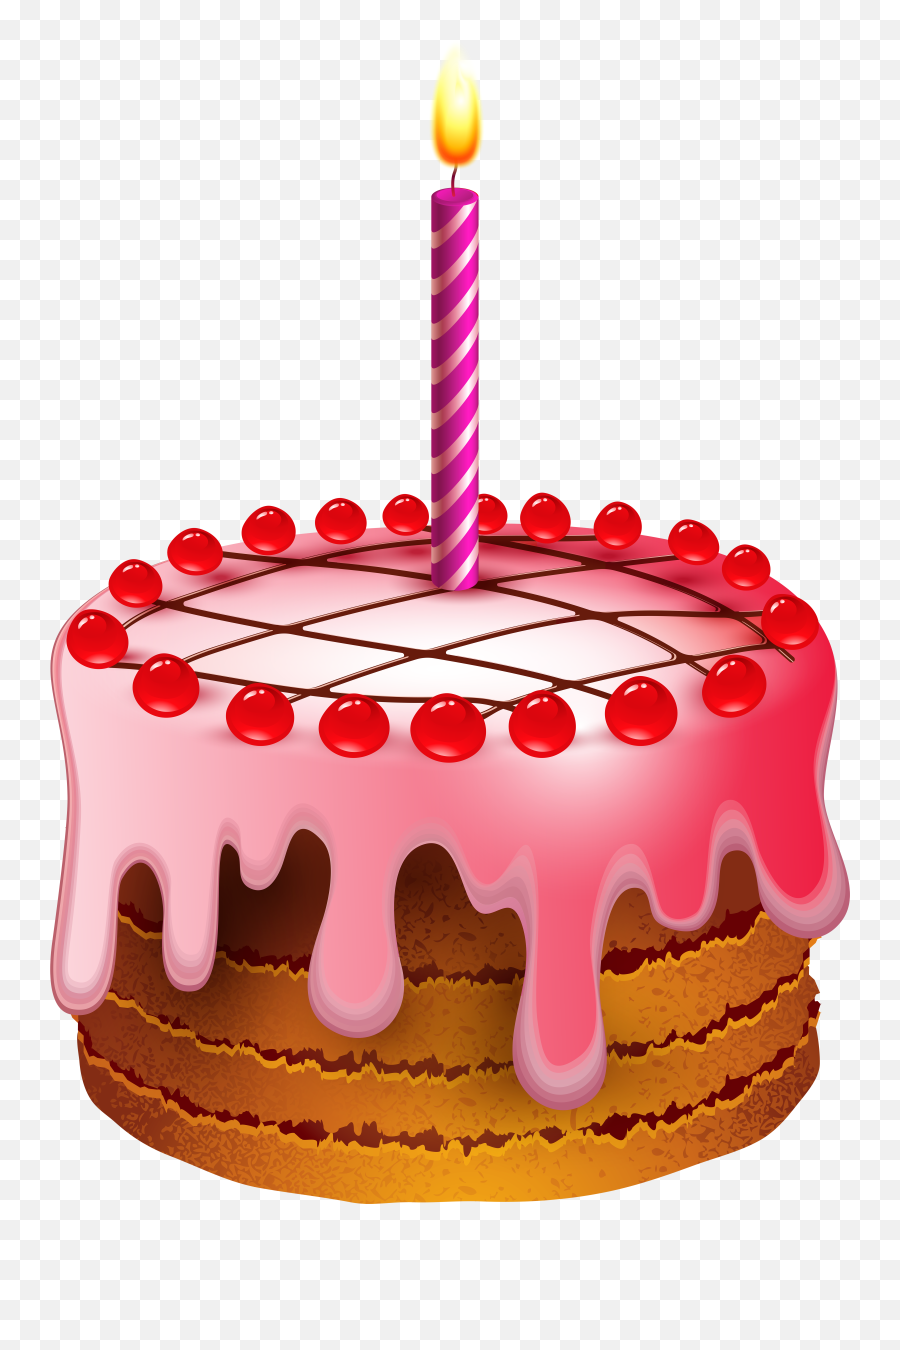 Birthday Cake Clip Art - Cake Png Download 54898000 Transparent Background Cake Clipart Png Emoji,Birthday Cake Png